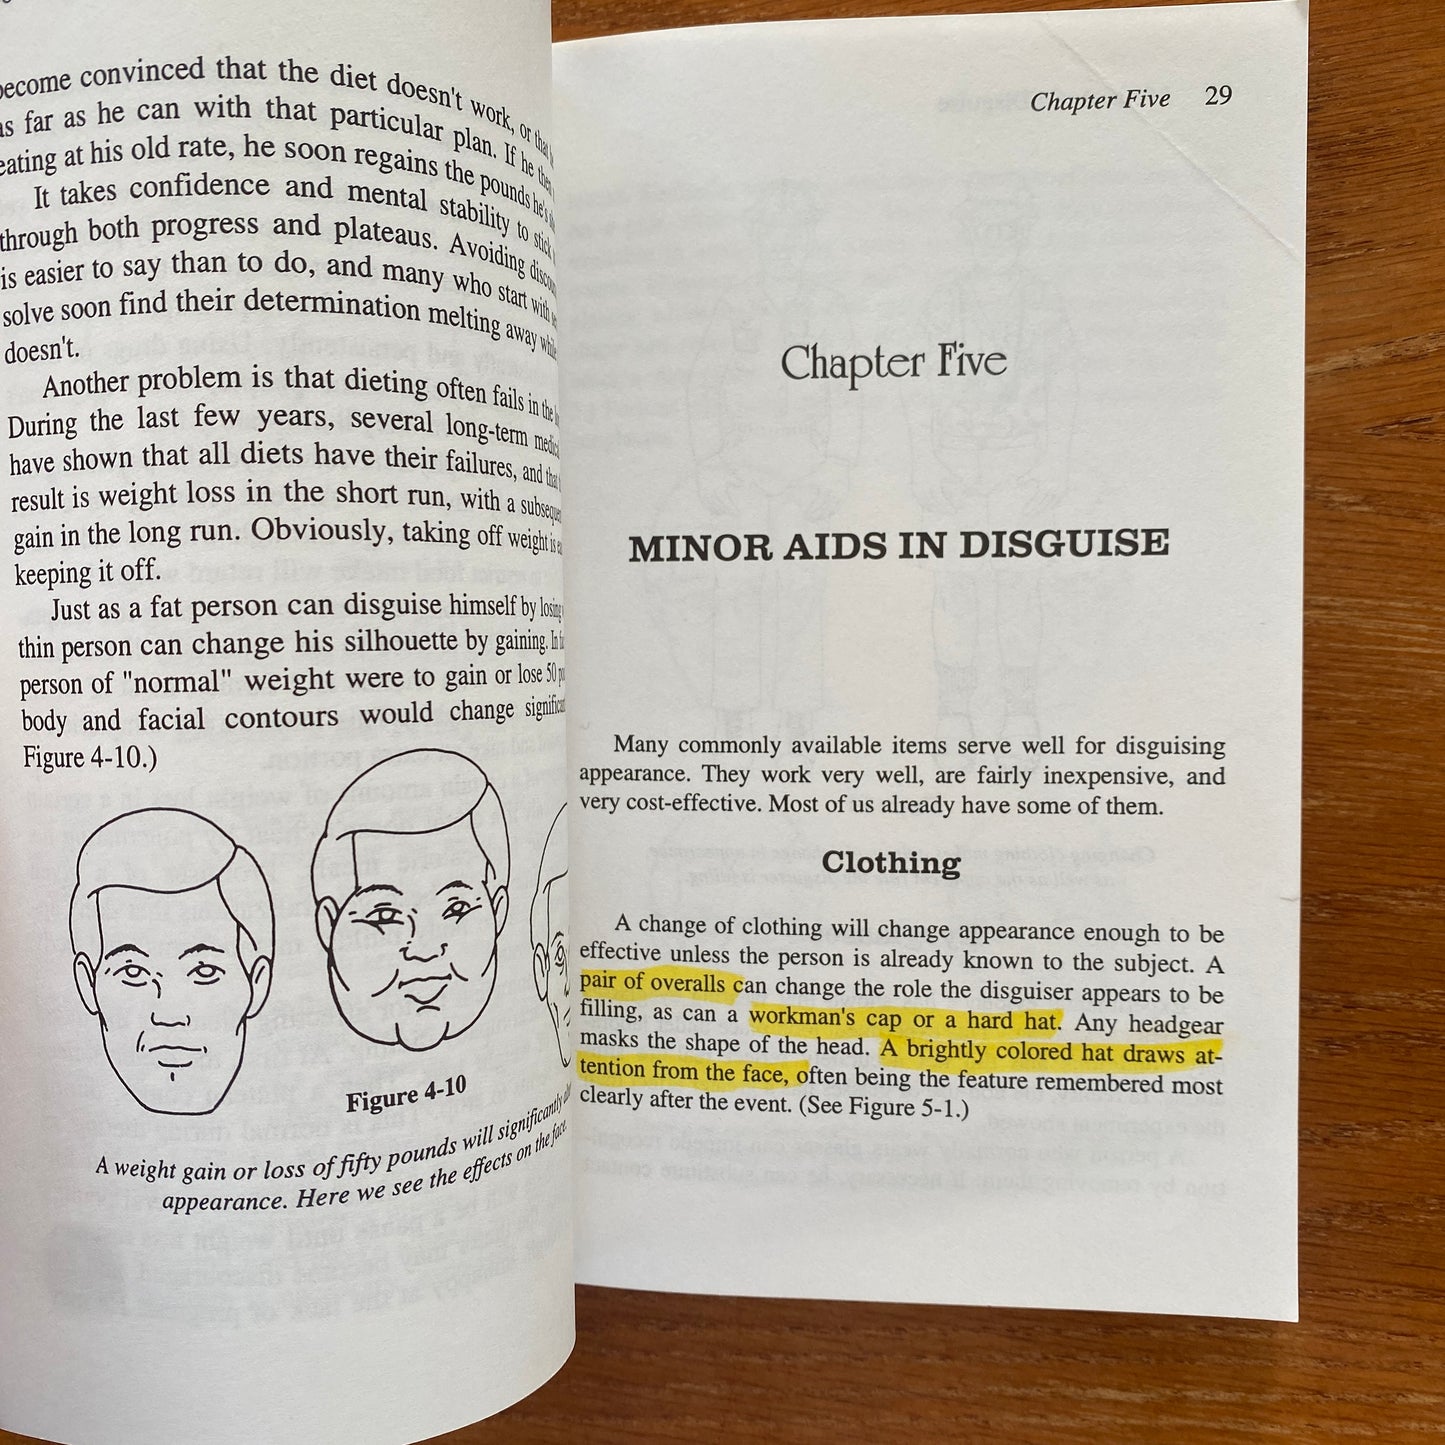 Methods Of Disguise: Second Edition - John Sample